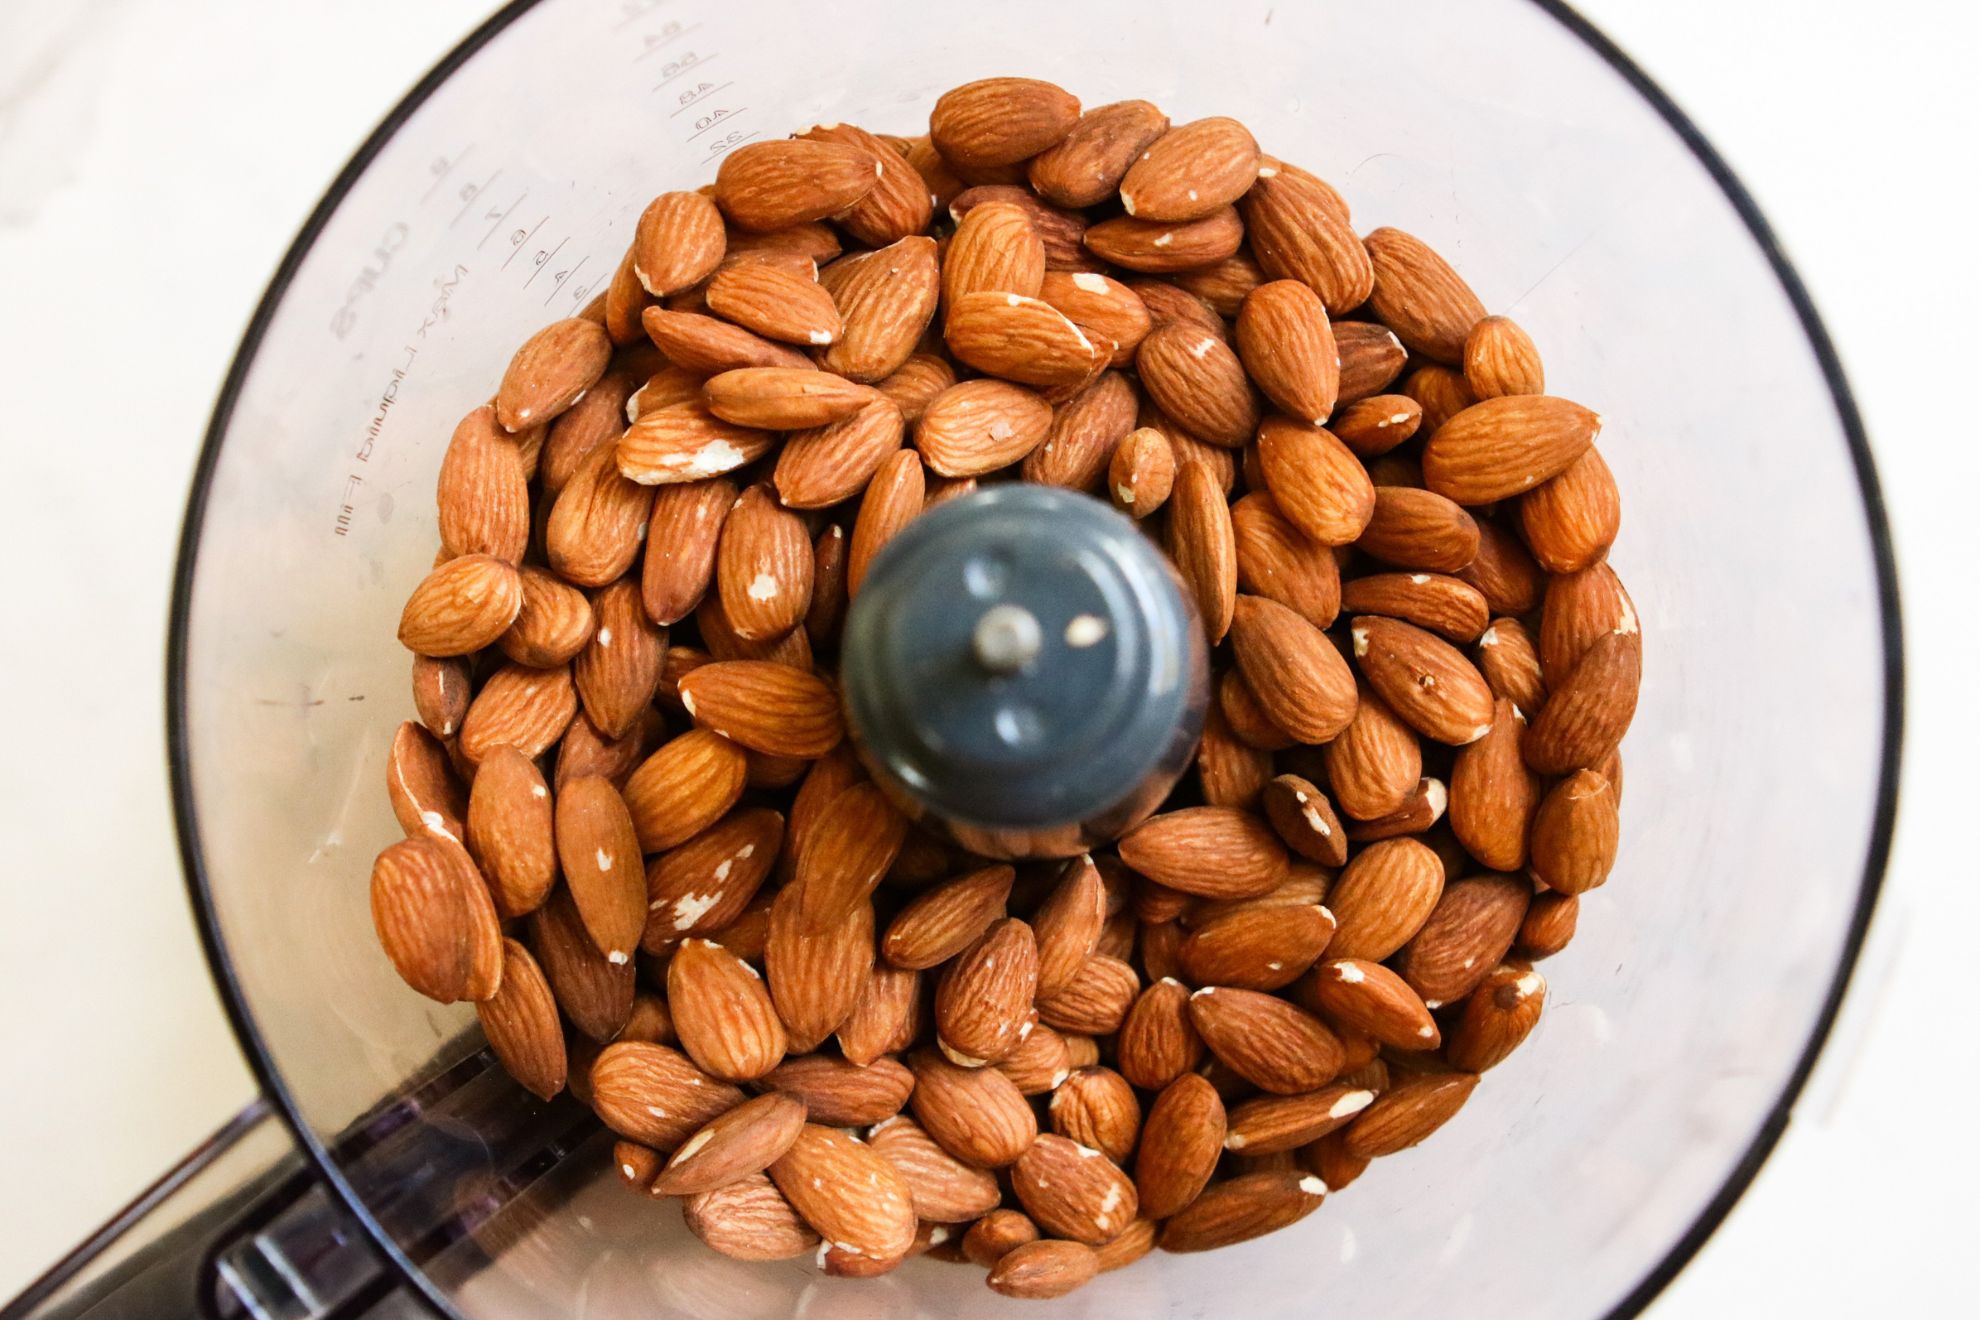 This is an overhead horizontal image of almonds in a food processor. The food processor sits on a white marble surface.